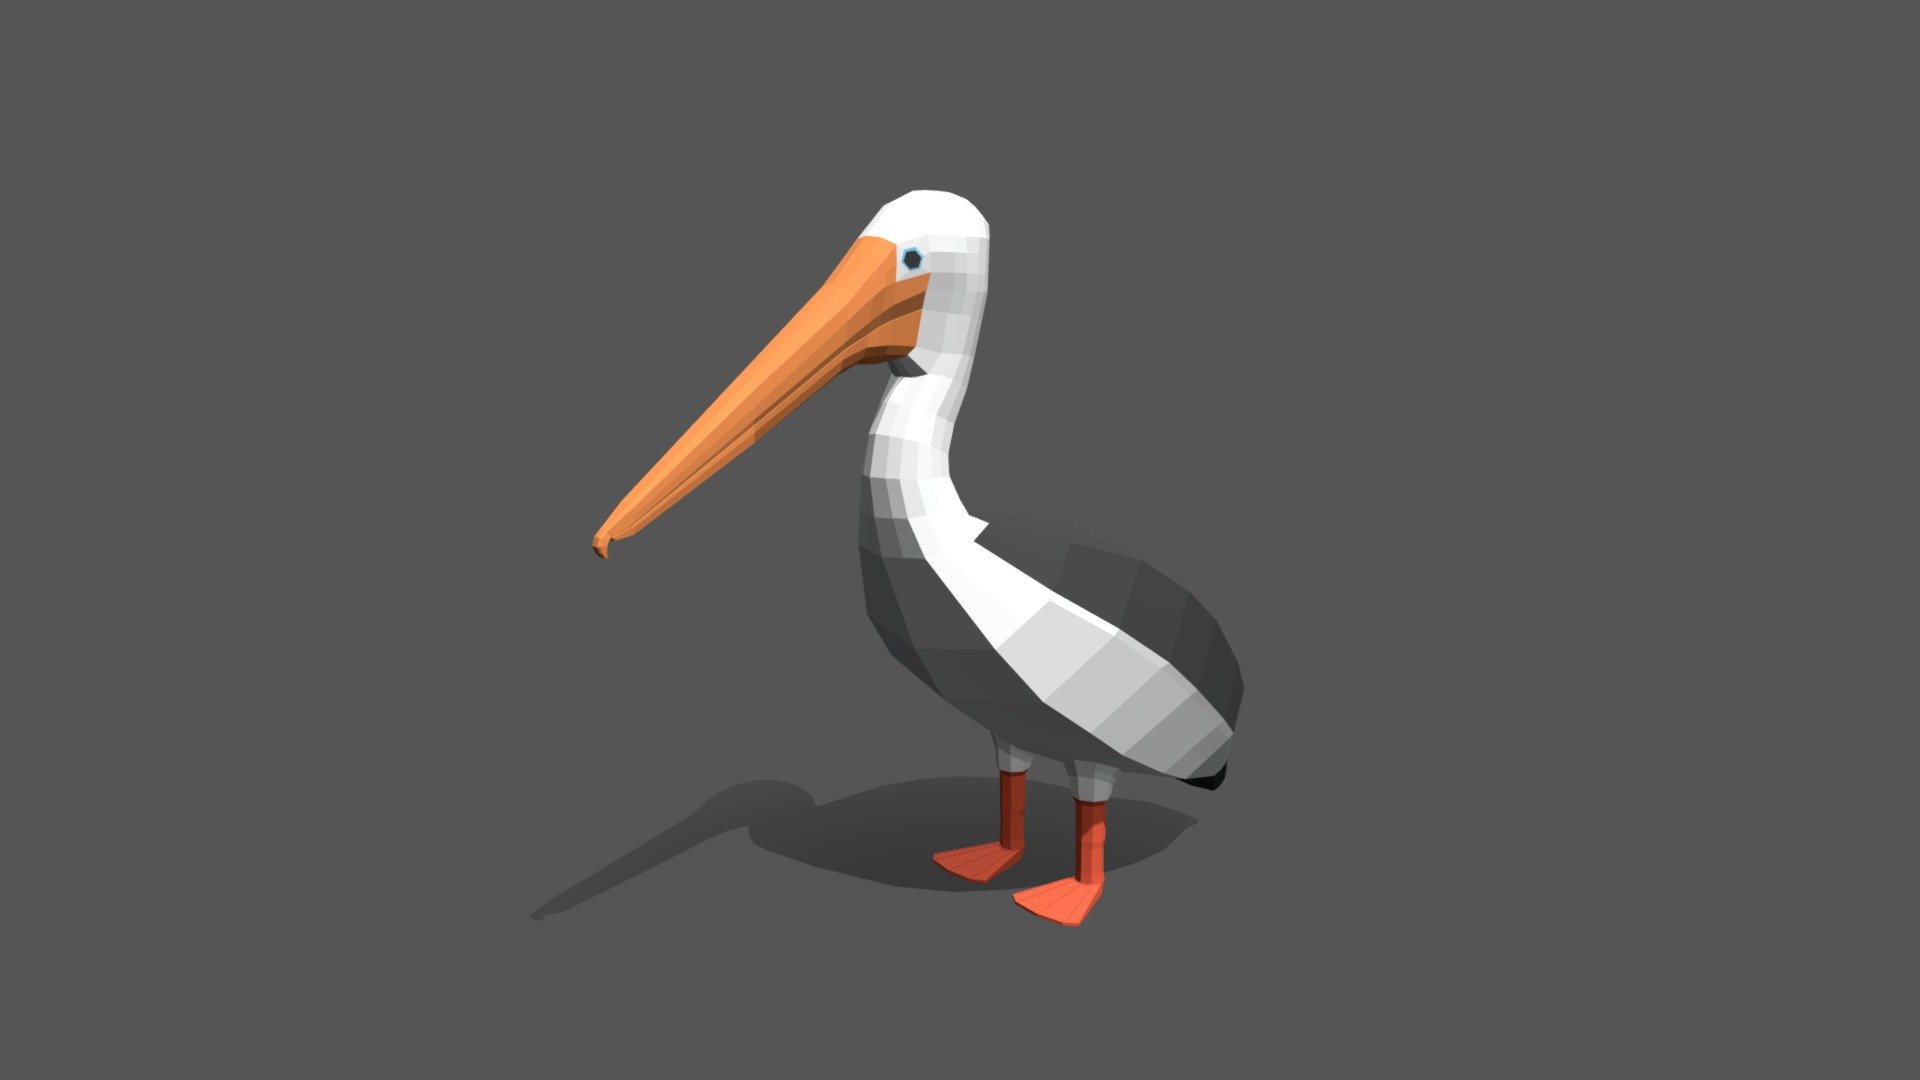 This is a low poly 3D model of a Pelican. The low poly Pelican was modeled and prepared for low-poly style renderings, background, general CG visualization presented as a mesh with quads only.

Verts : 994 Faces: 992

The 3D model have simple materials with diffuse colors.

No ring, maps and no UVW mapping is available.

The original file was created in blender. You will receive a 3DS, OBJ, FBX, blend, DAE, Stl.

All preview images were rendered with Blender Cycles. Product is ready to render out-of-the-box. Please note that the lights, cameras, and background is only included in the .blend file. The model is clean and alone in the other provided files, centred at origin and has real-world scale 3d model